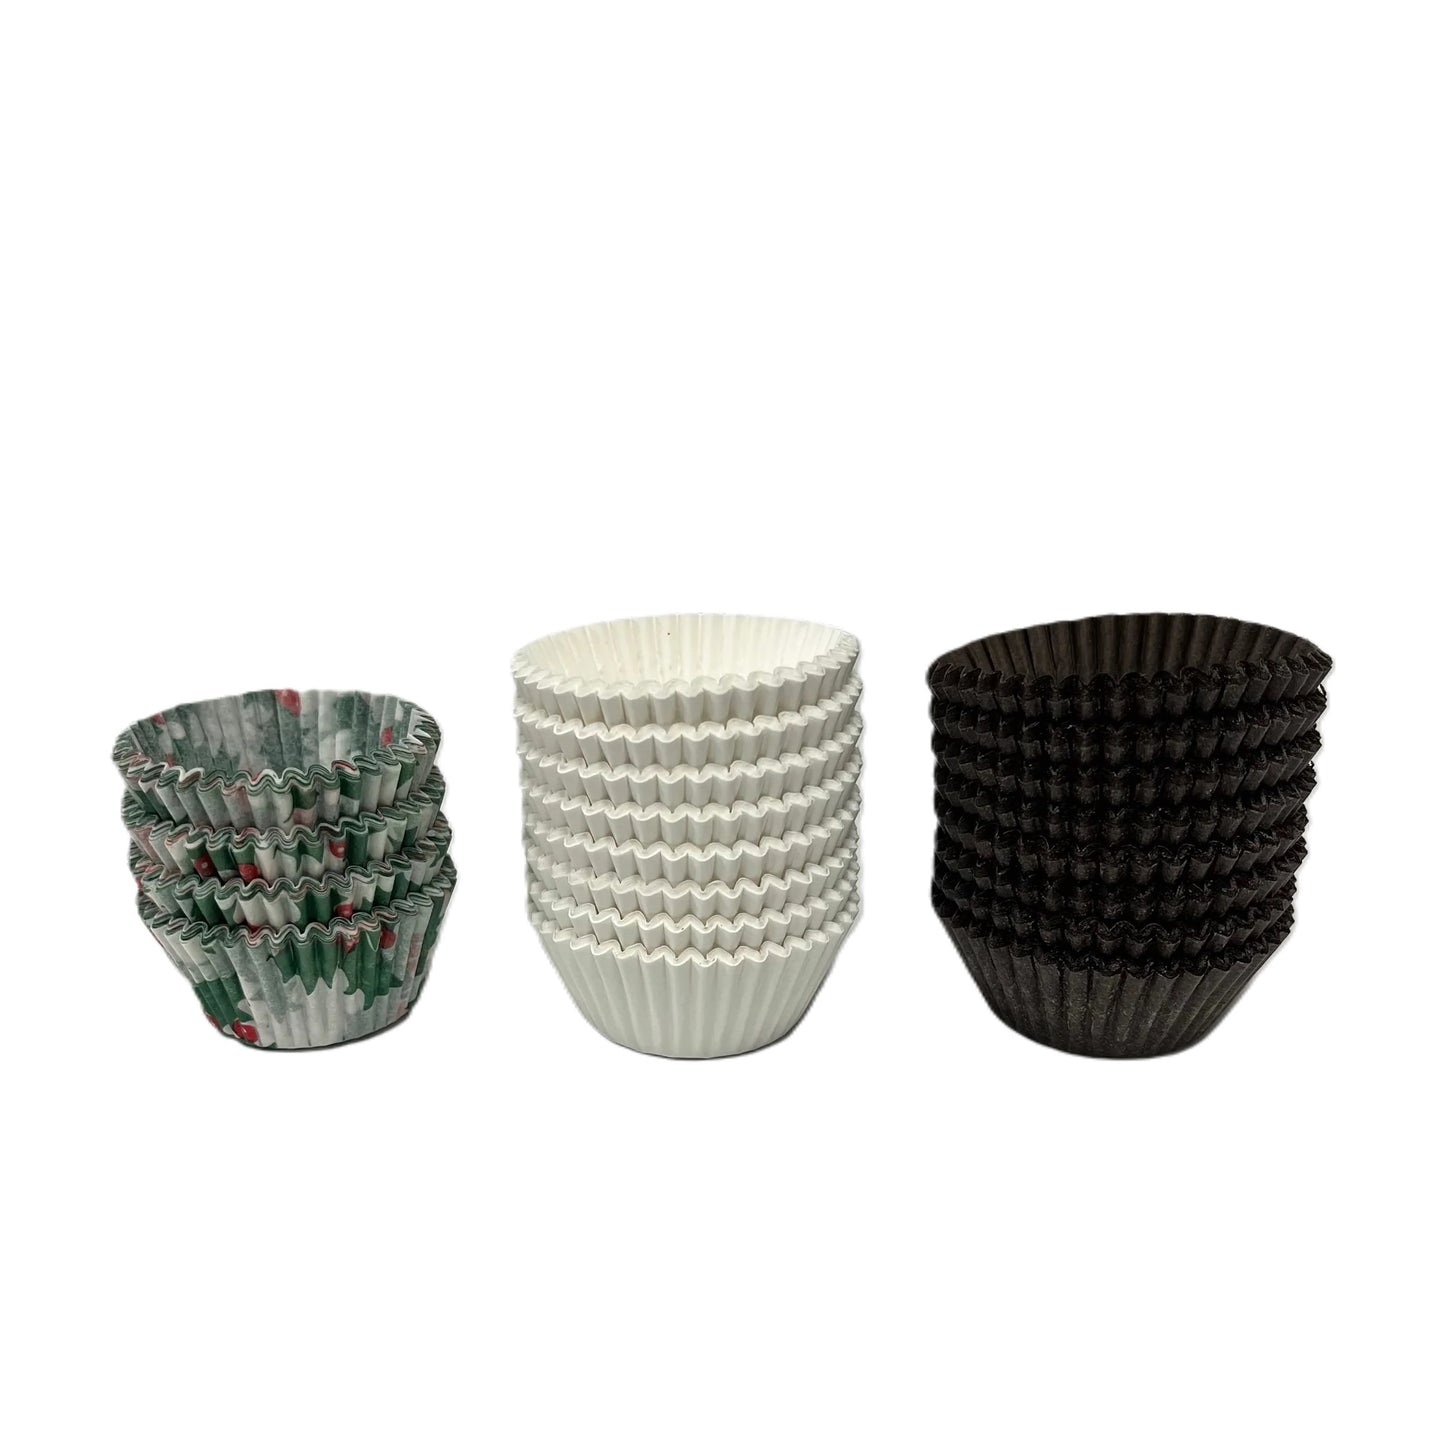 Three size 6 candy cups in a line. Holly, white, and brown colored